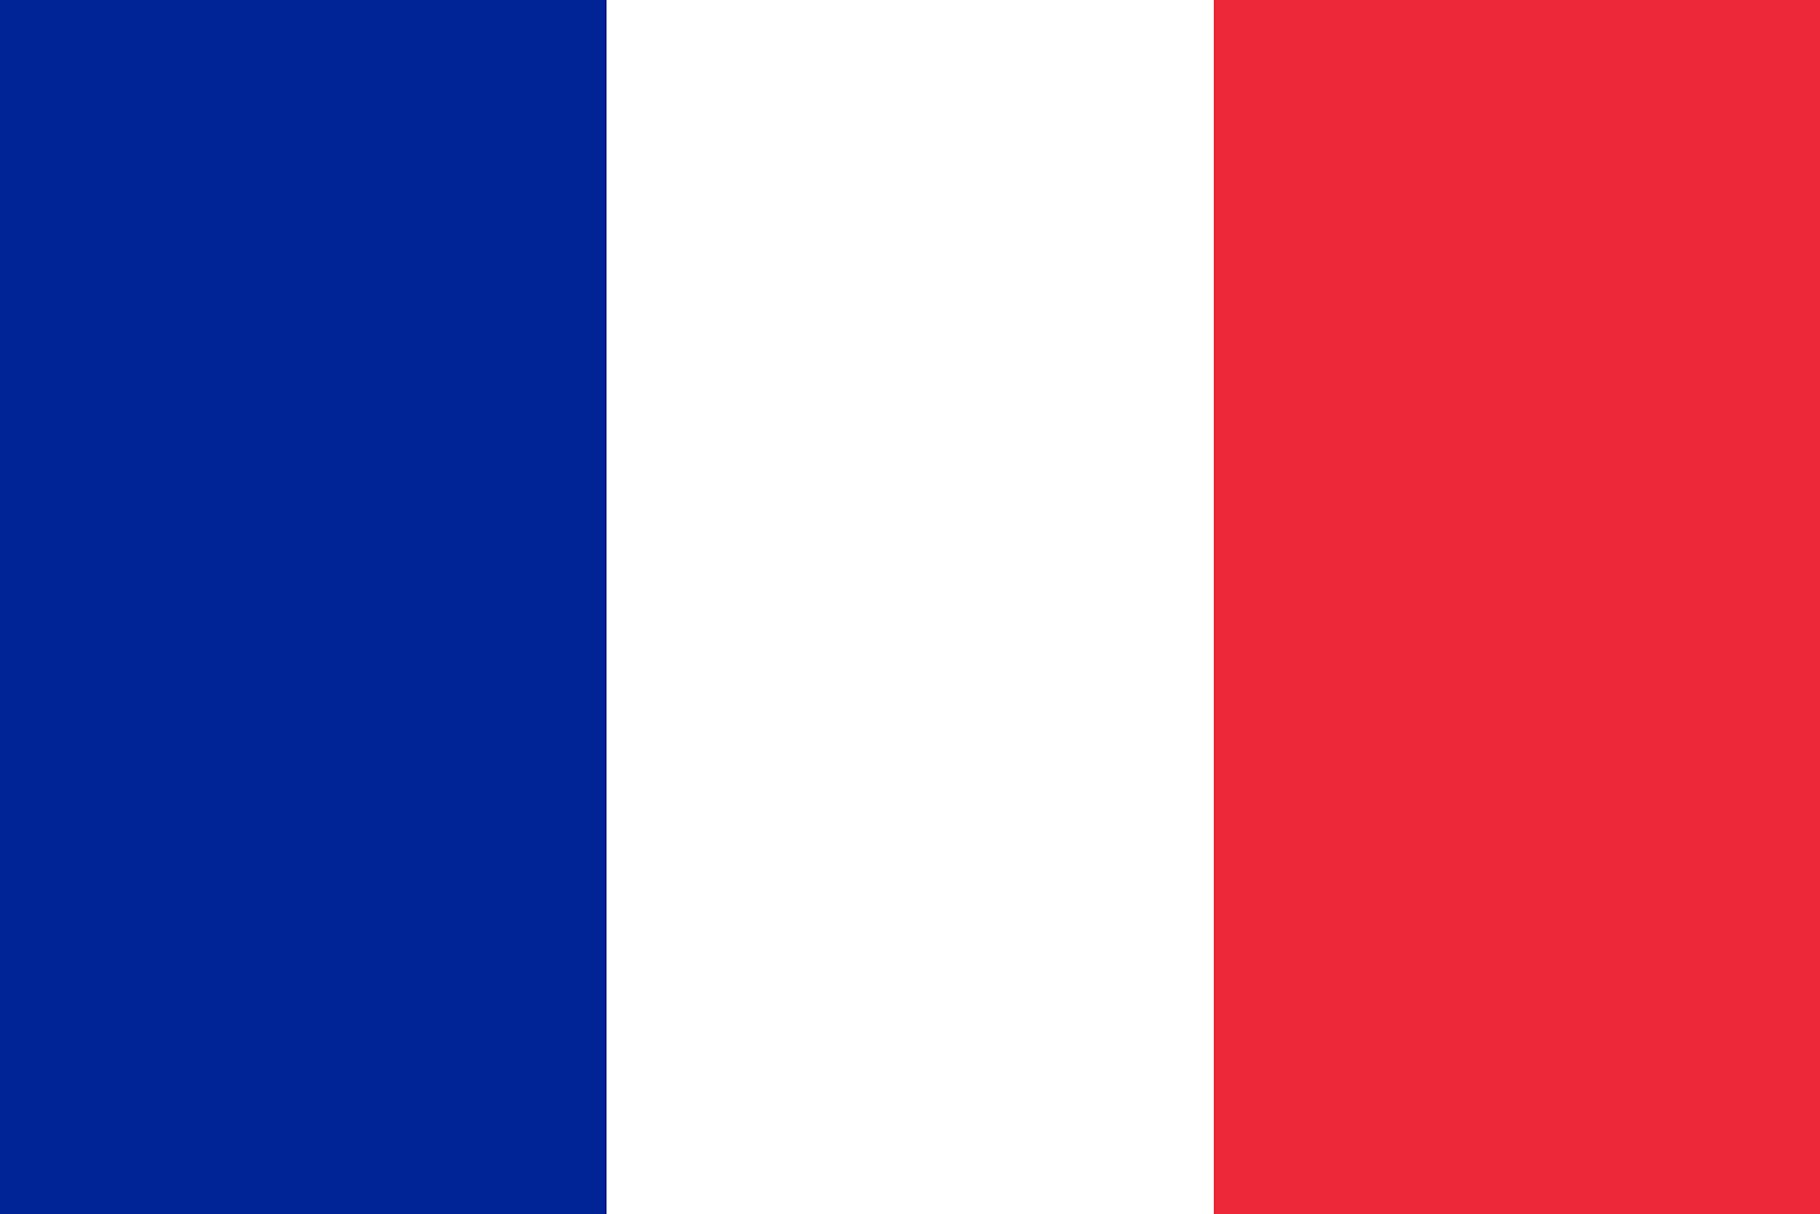 France email list